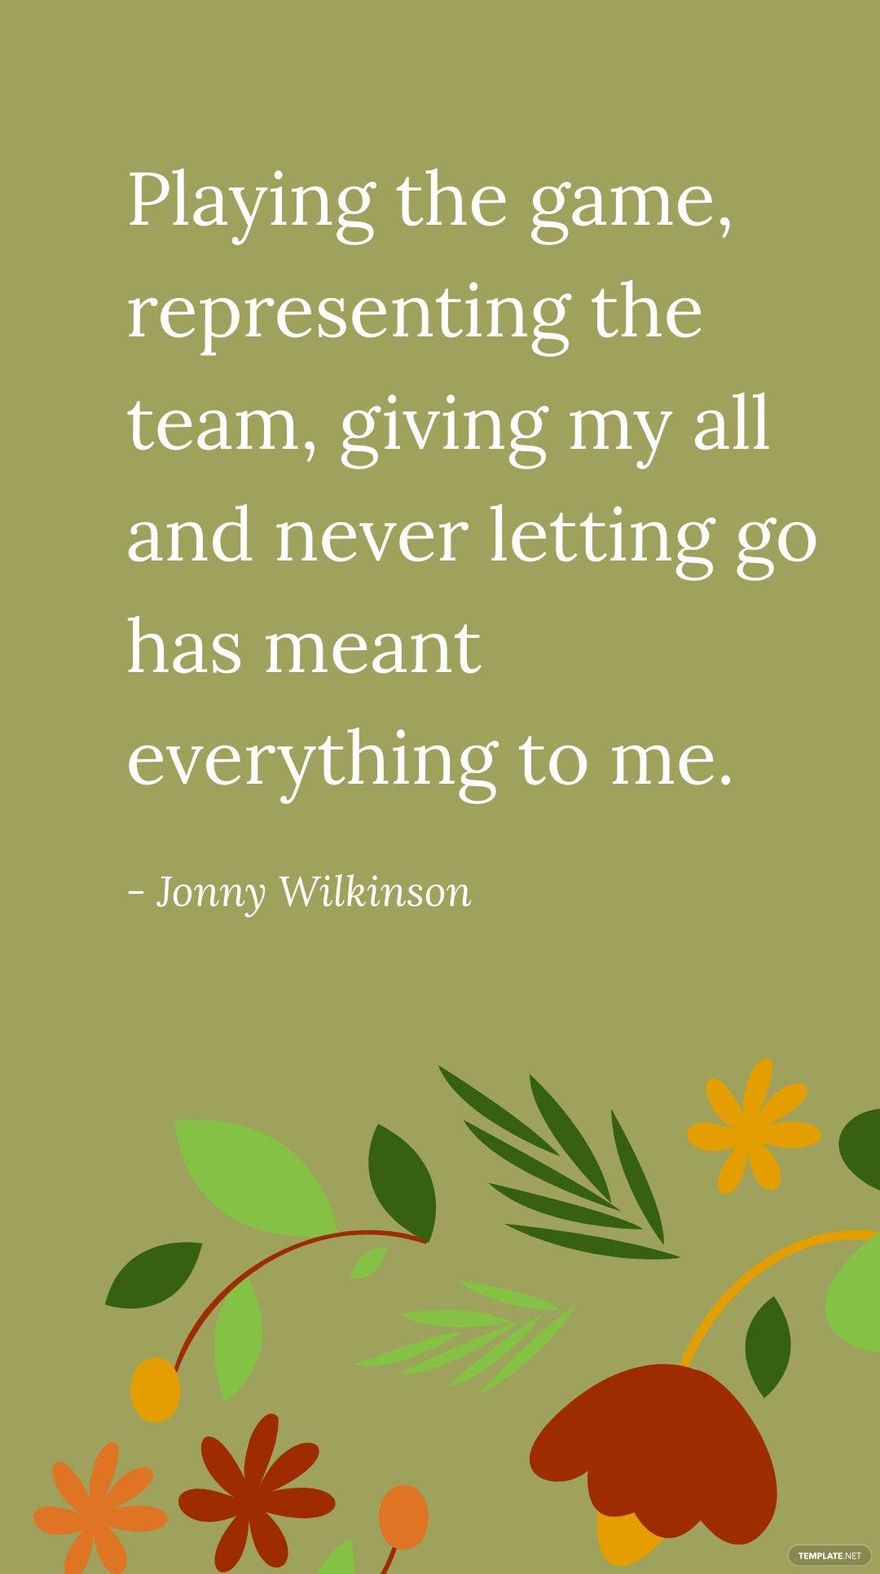 Free Jonny Wilkinson - Playing the game, representing the team, giving my all and never letting go has meant everything to me. in JPG